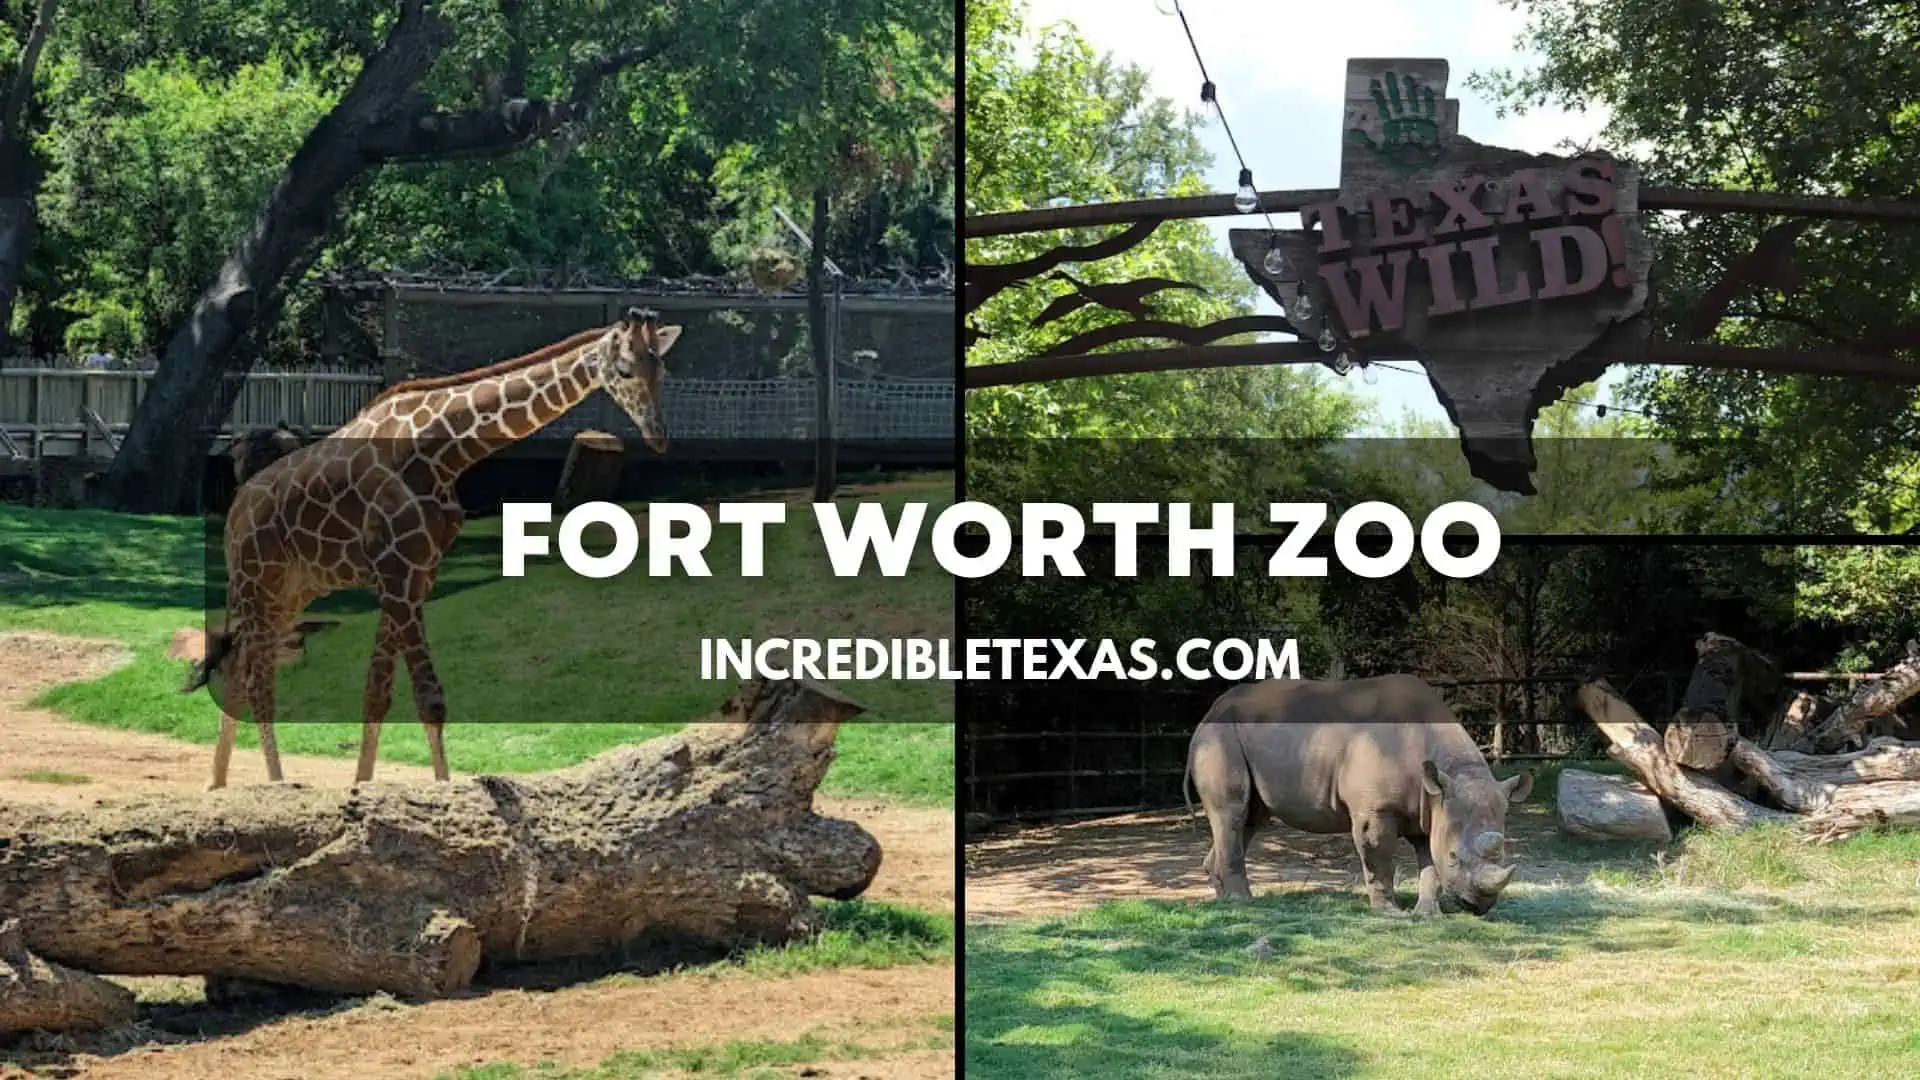 Fort Worth Zoo Tickets Hours Map Free Days Price Lights Parking Details.webp